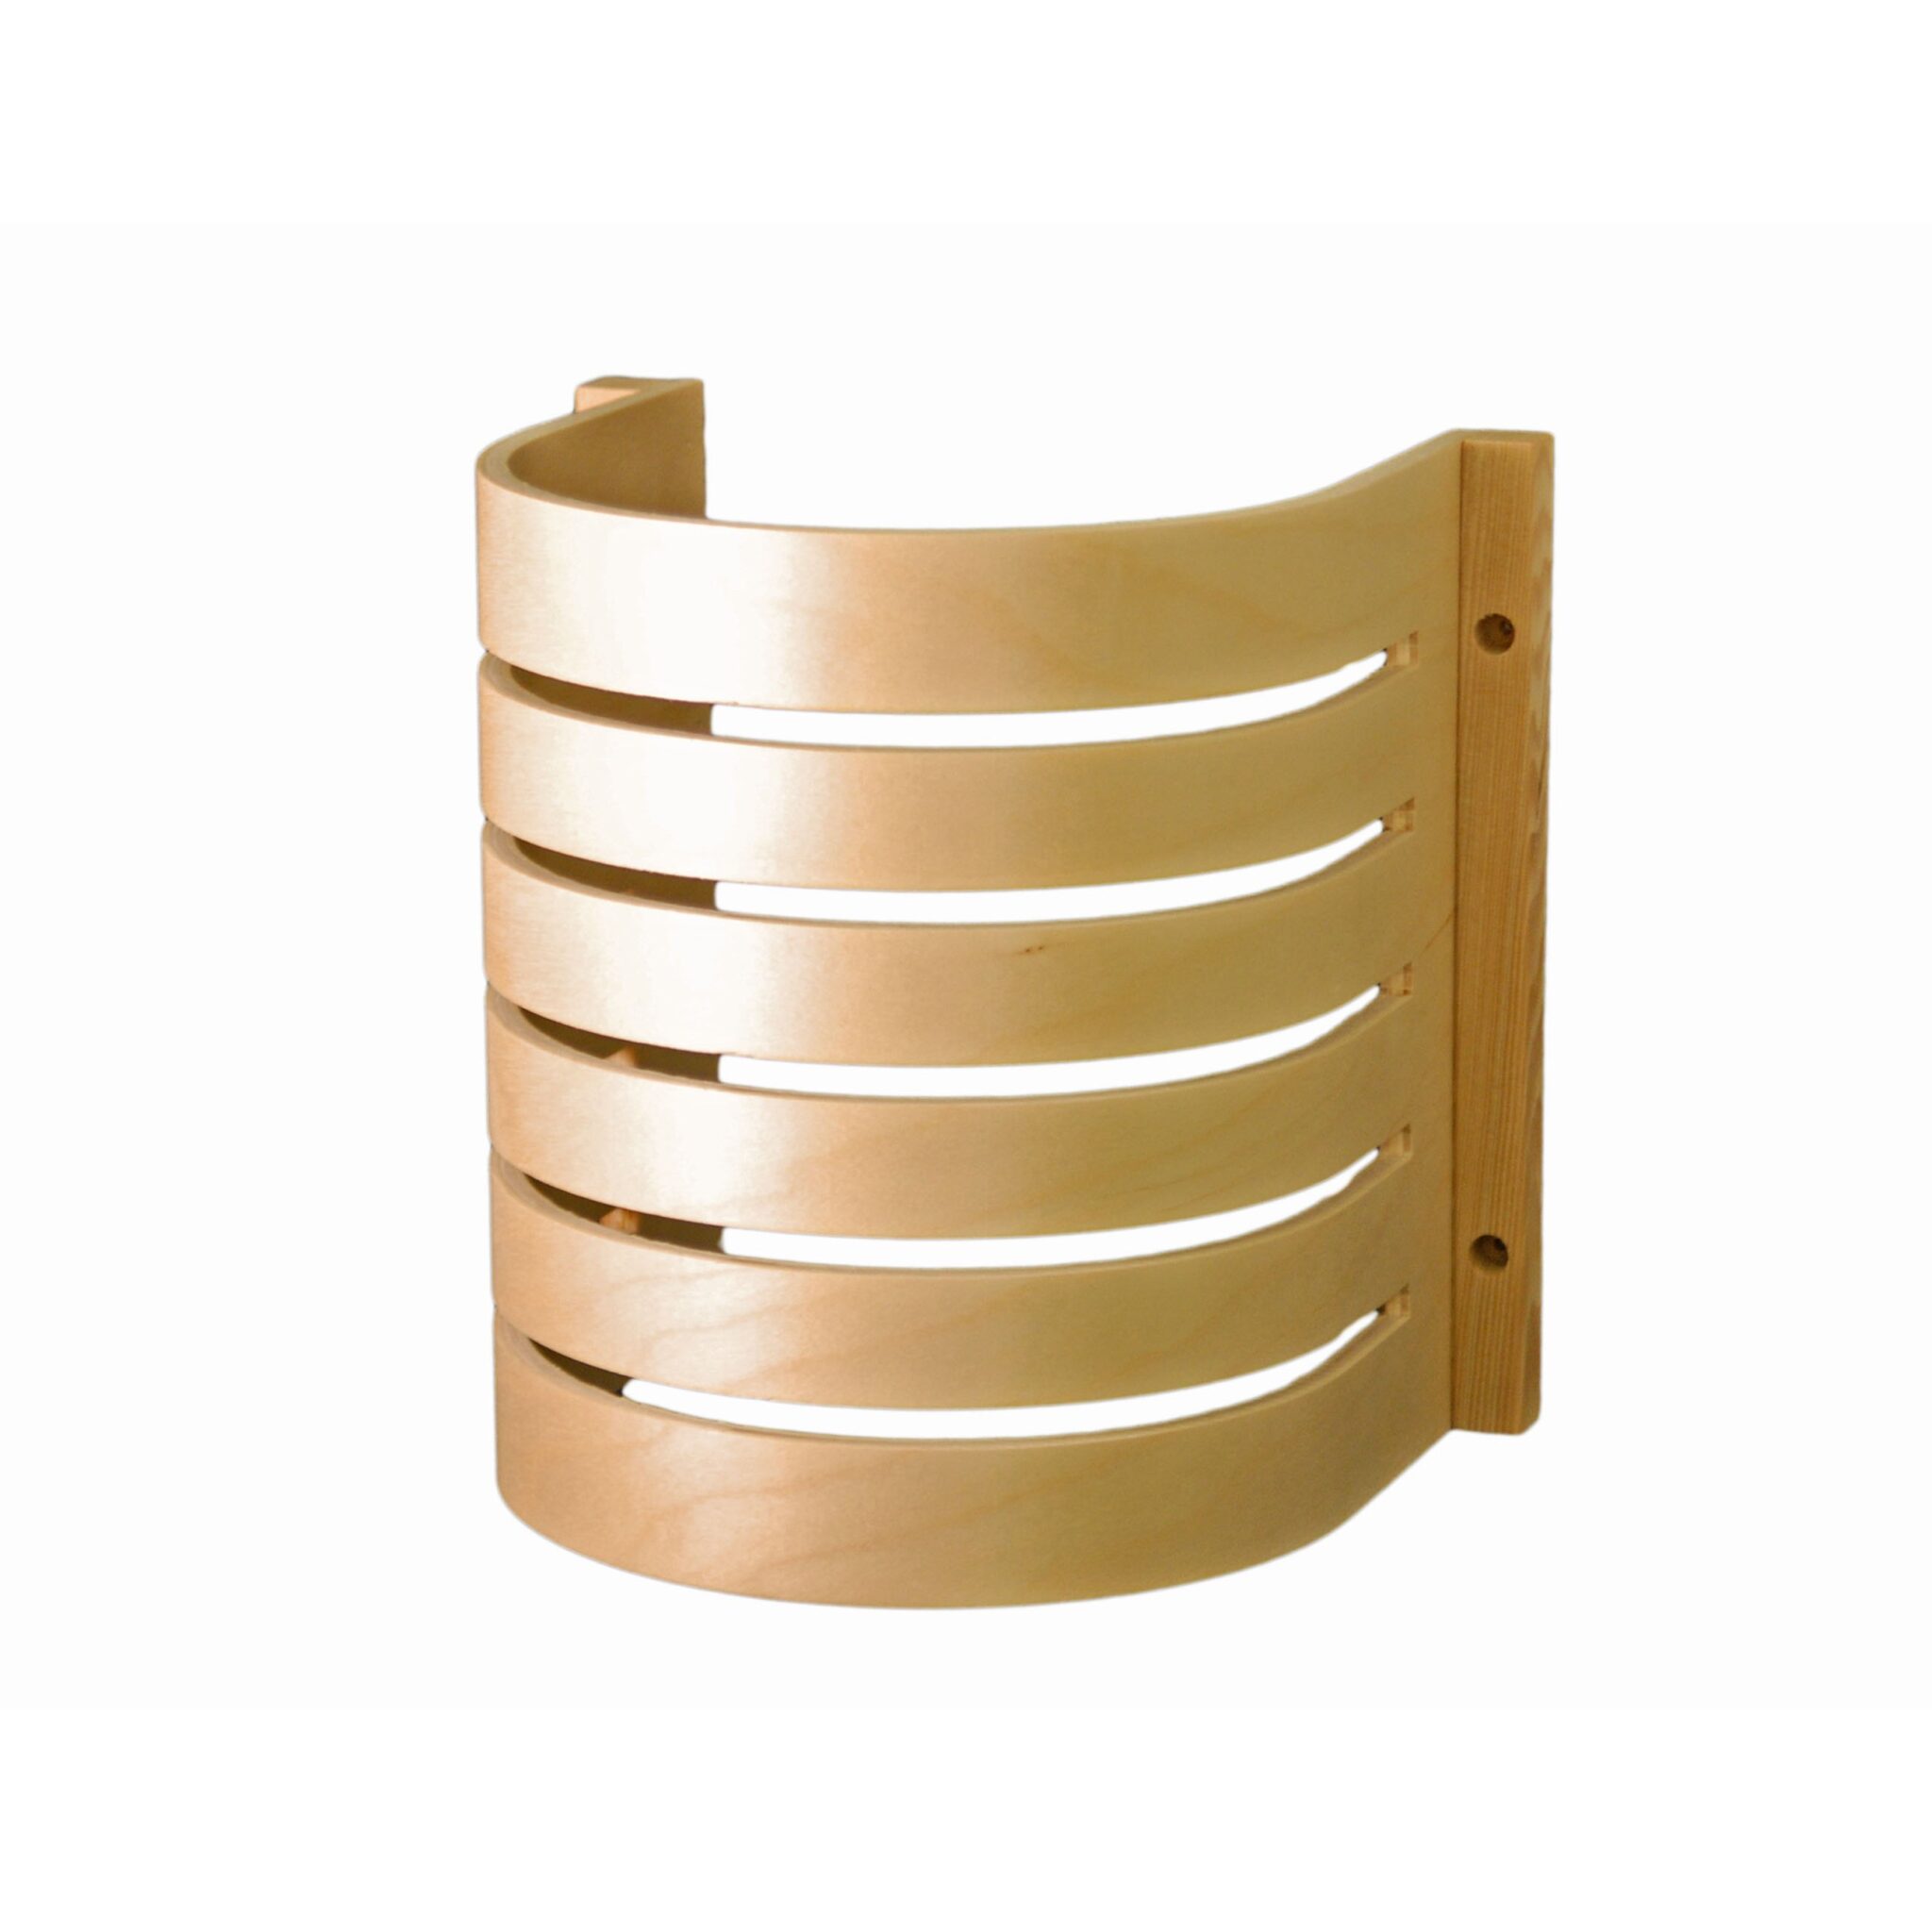 Curved Light Shade is made of Birch 7 ¾” W x 9″H x 7 1/8″D (For use with vapor-proof wall light”)